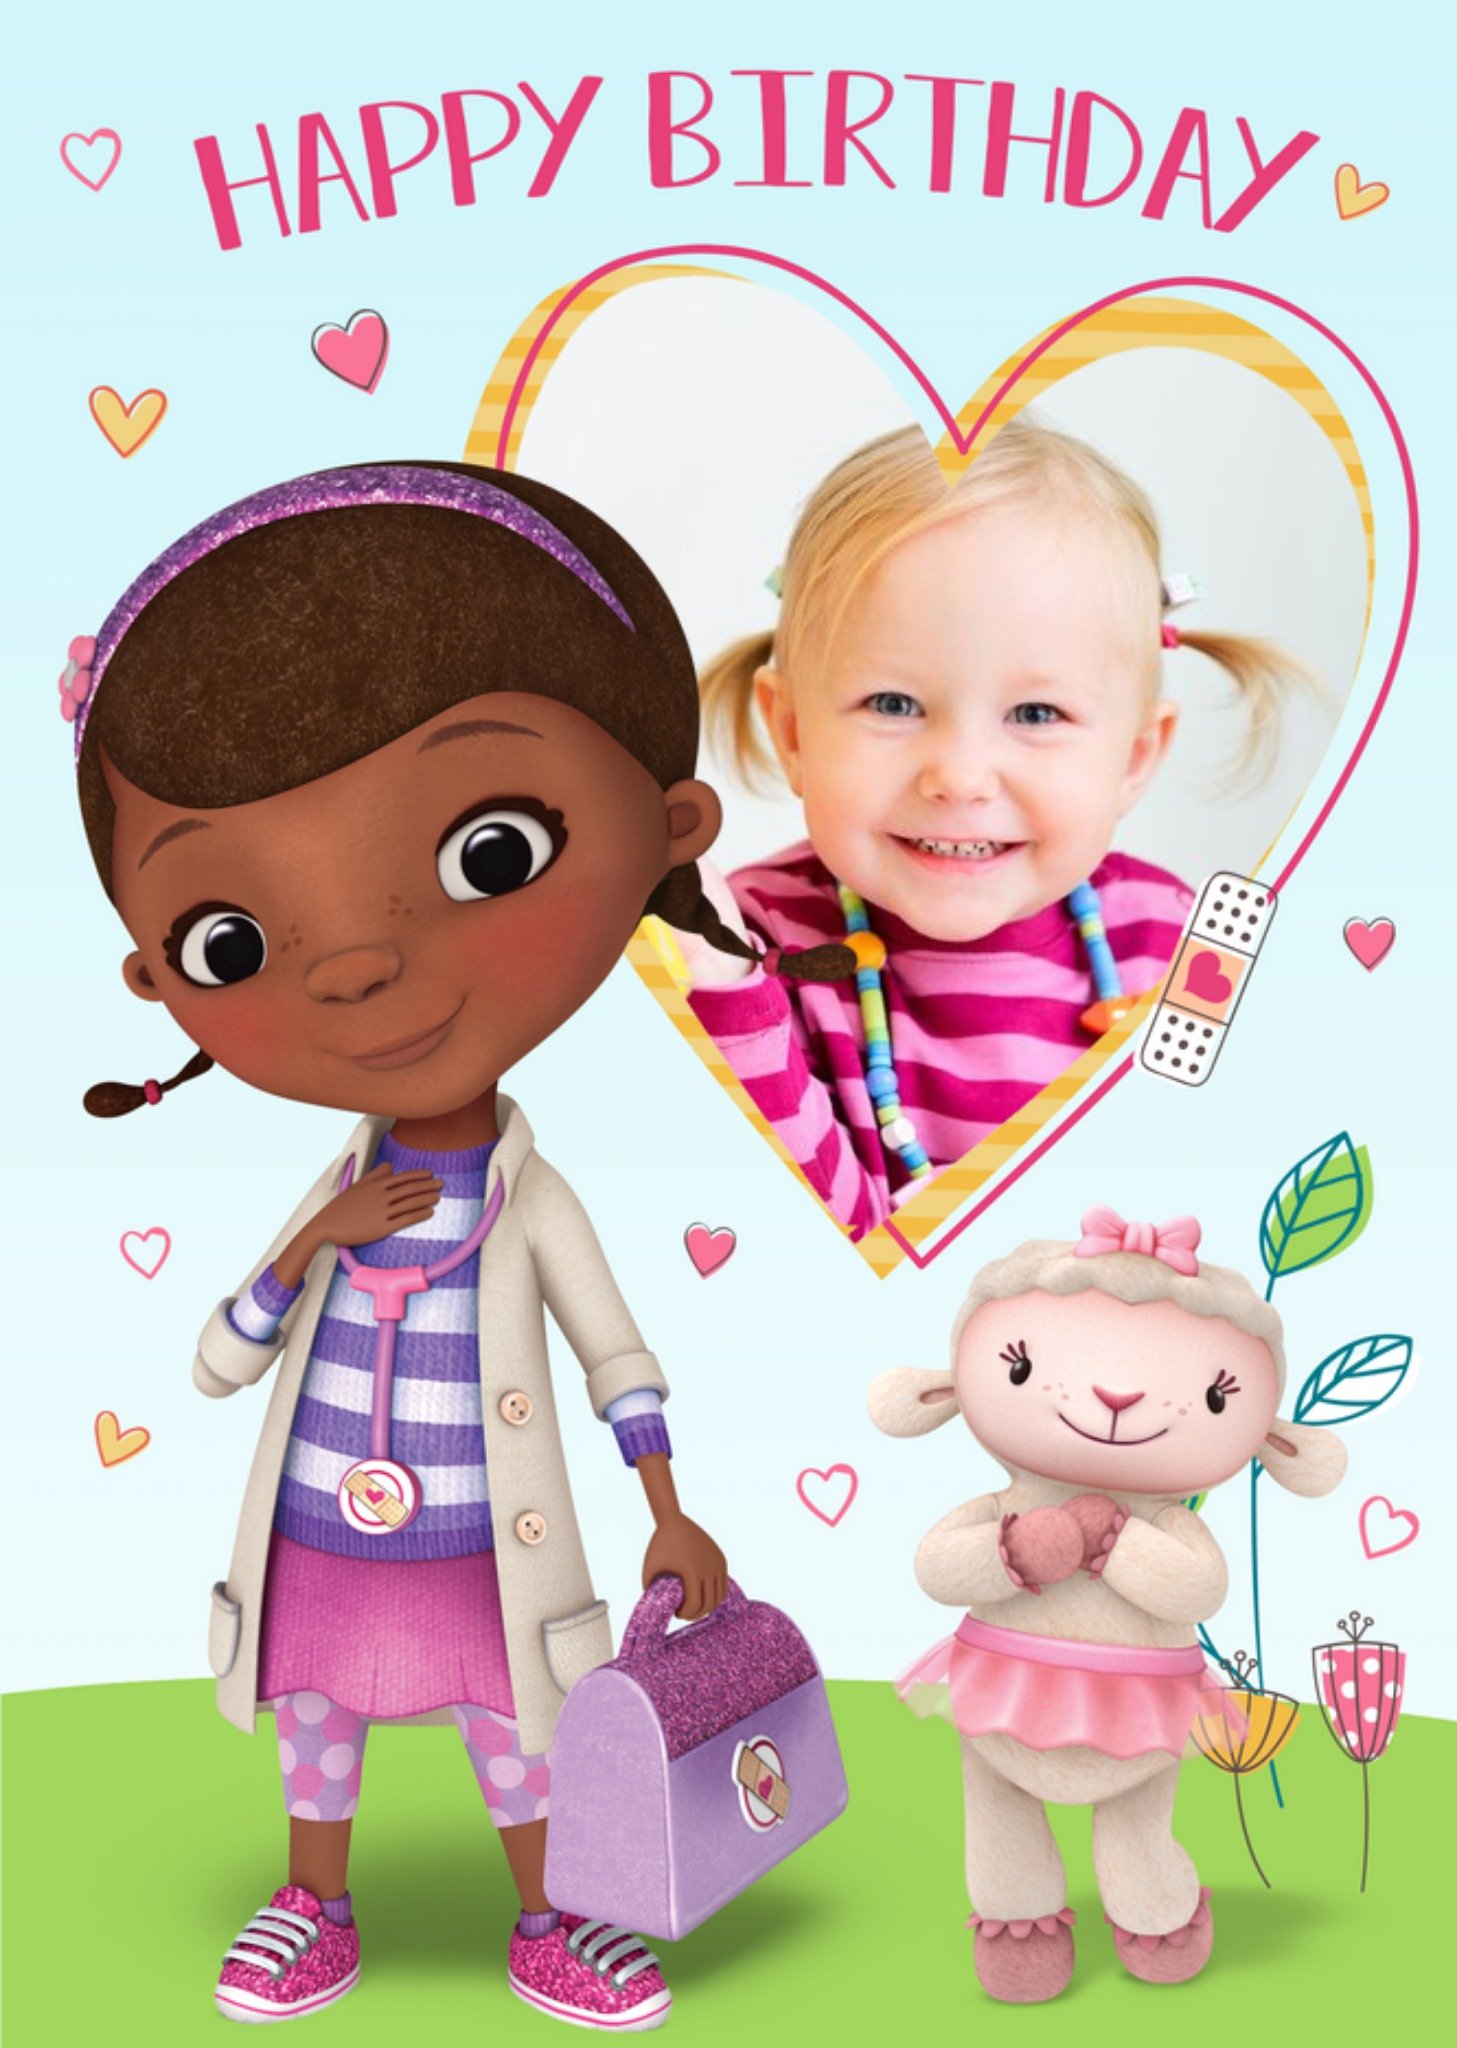 Disney Doc Mcstuffins And Lambie Heart Shaped Photo Upload Happy Birthday Card, Large